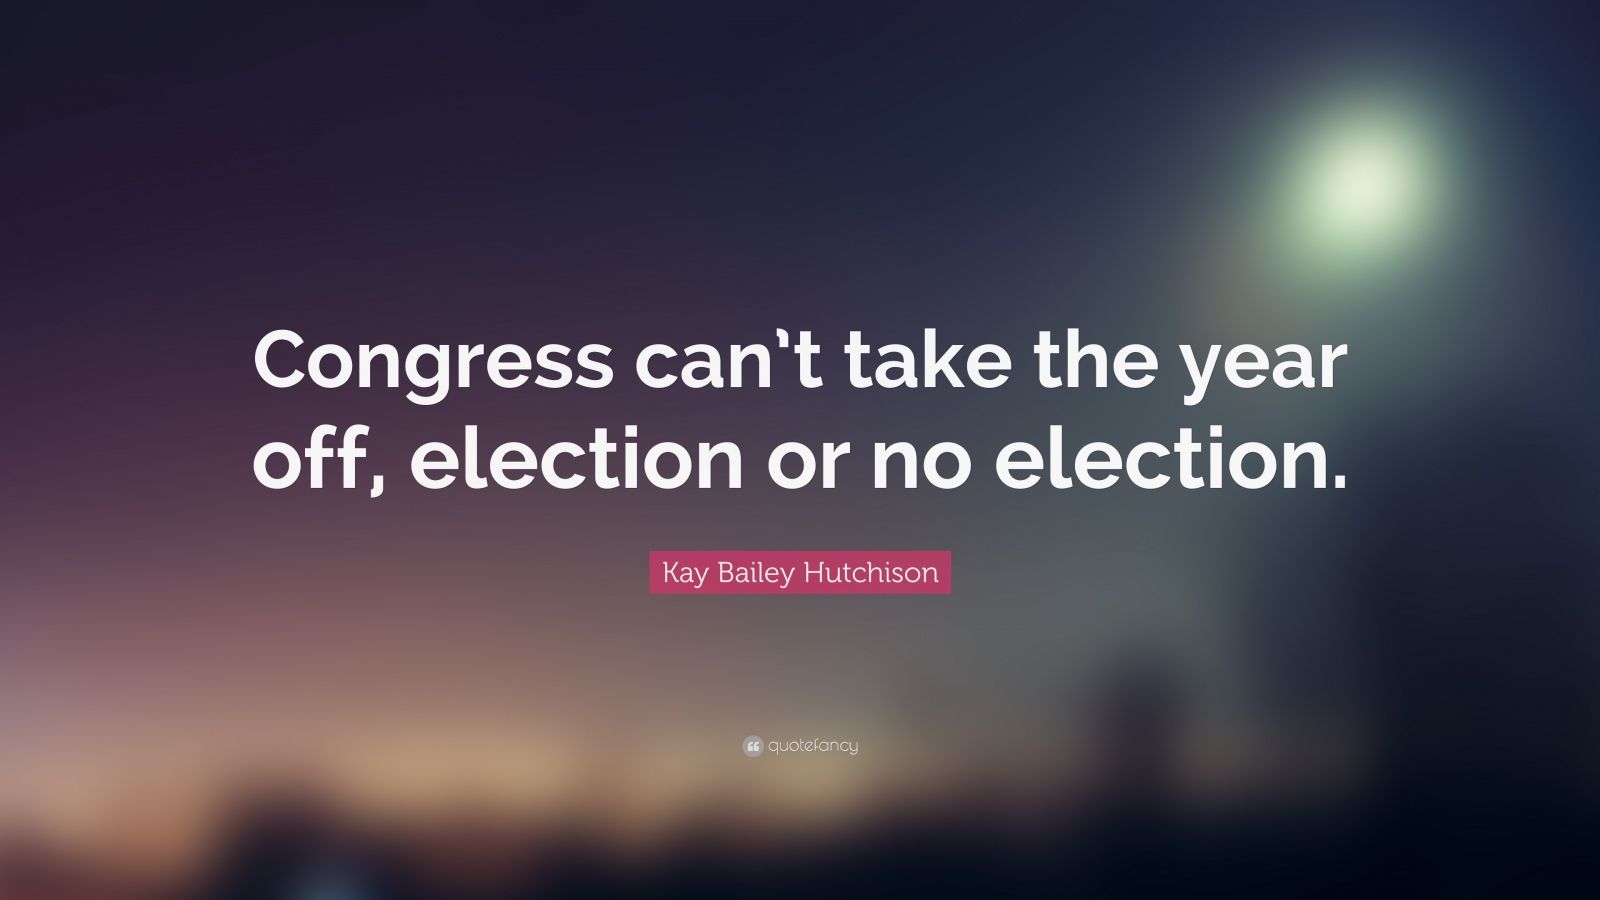 Kay Bailey Hutchison Quotes (20 wallpapers) - Quotefancy